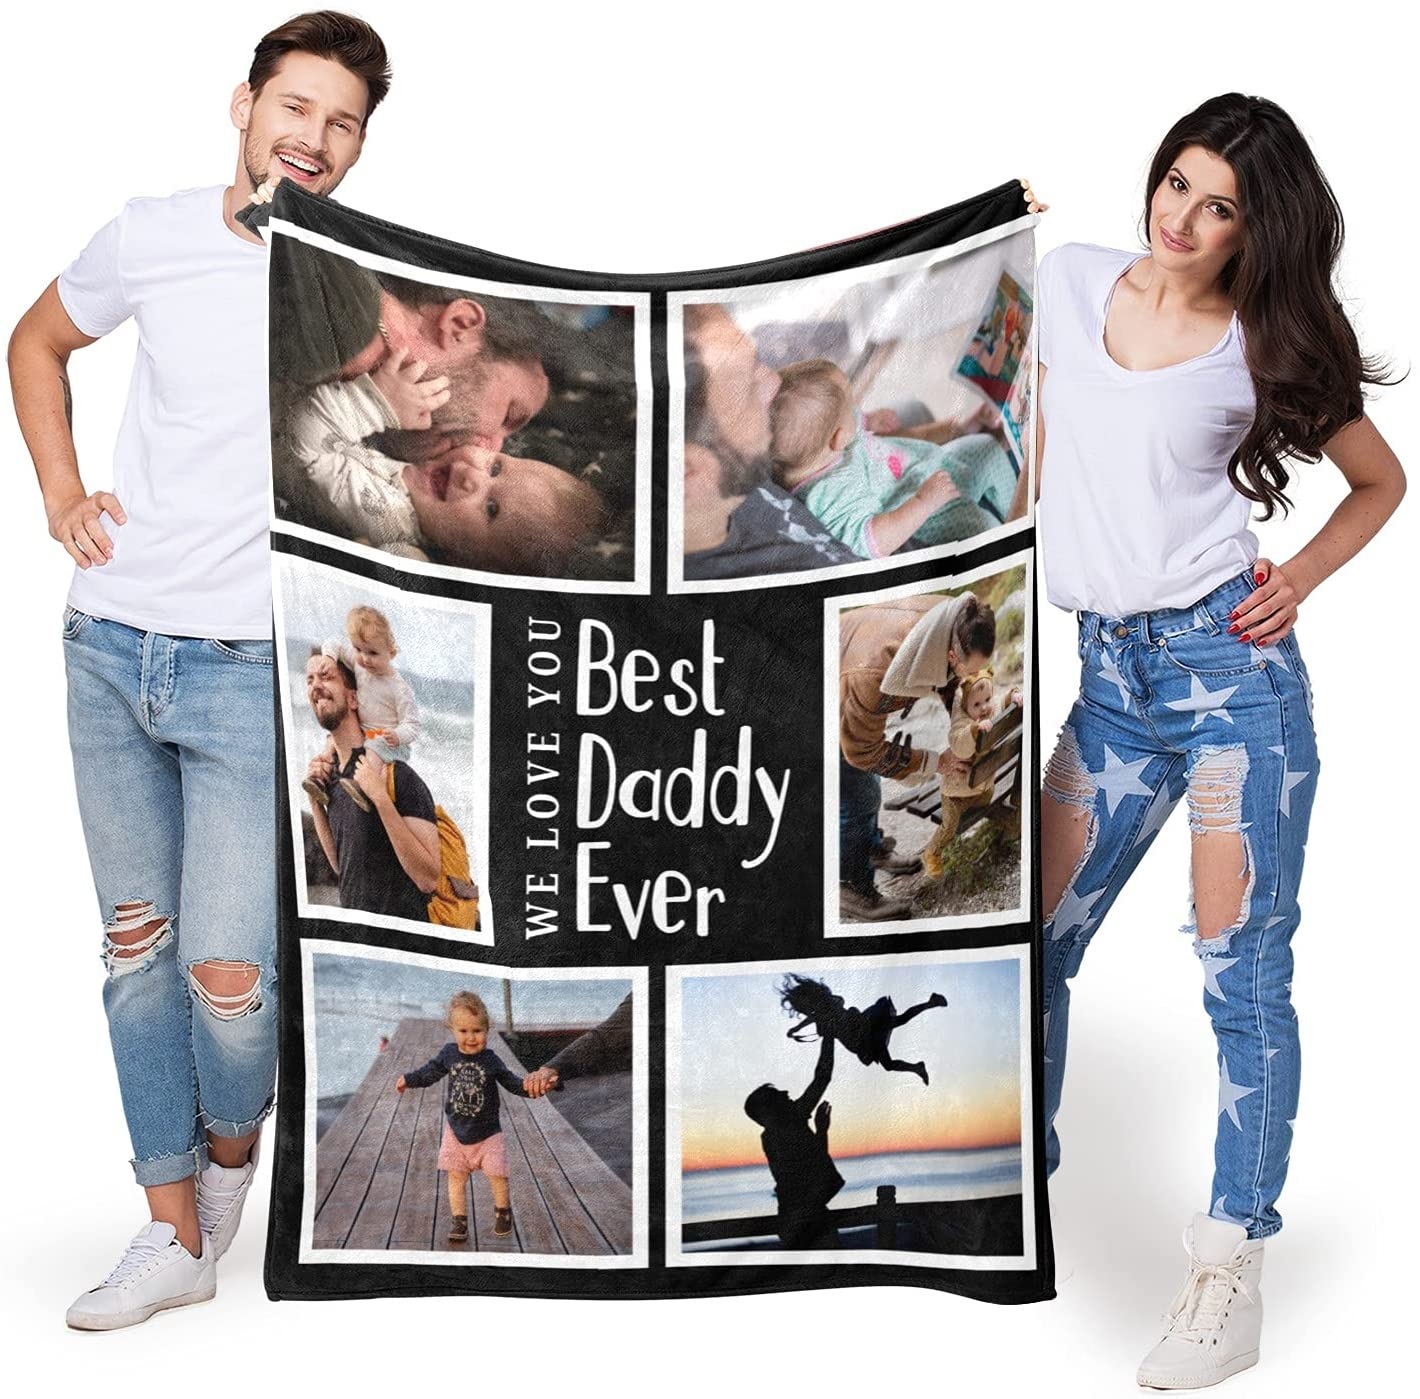 Personalized dad blanket